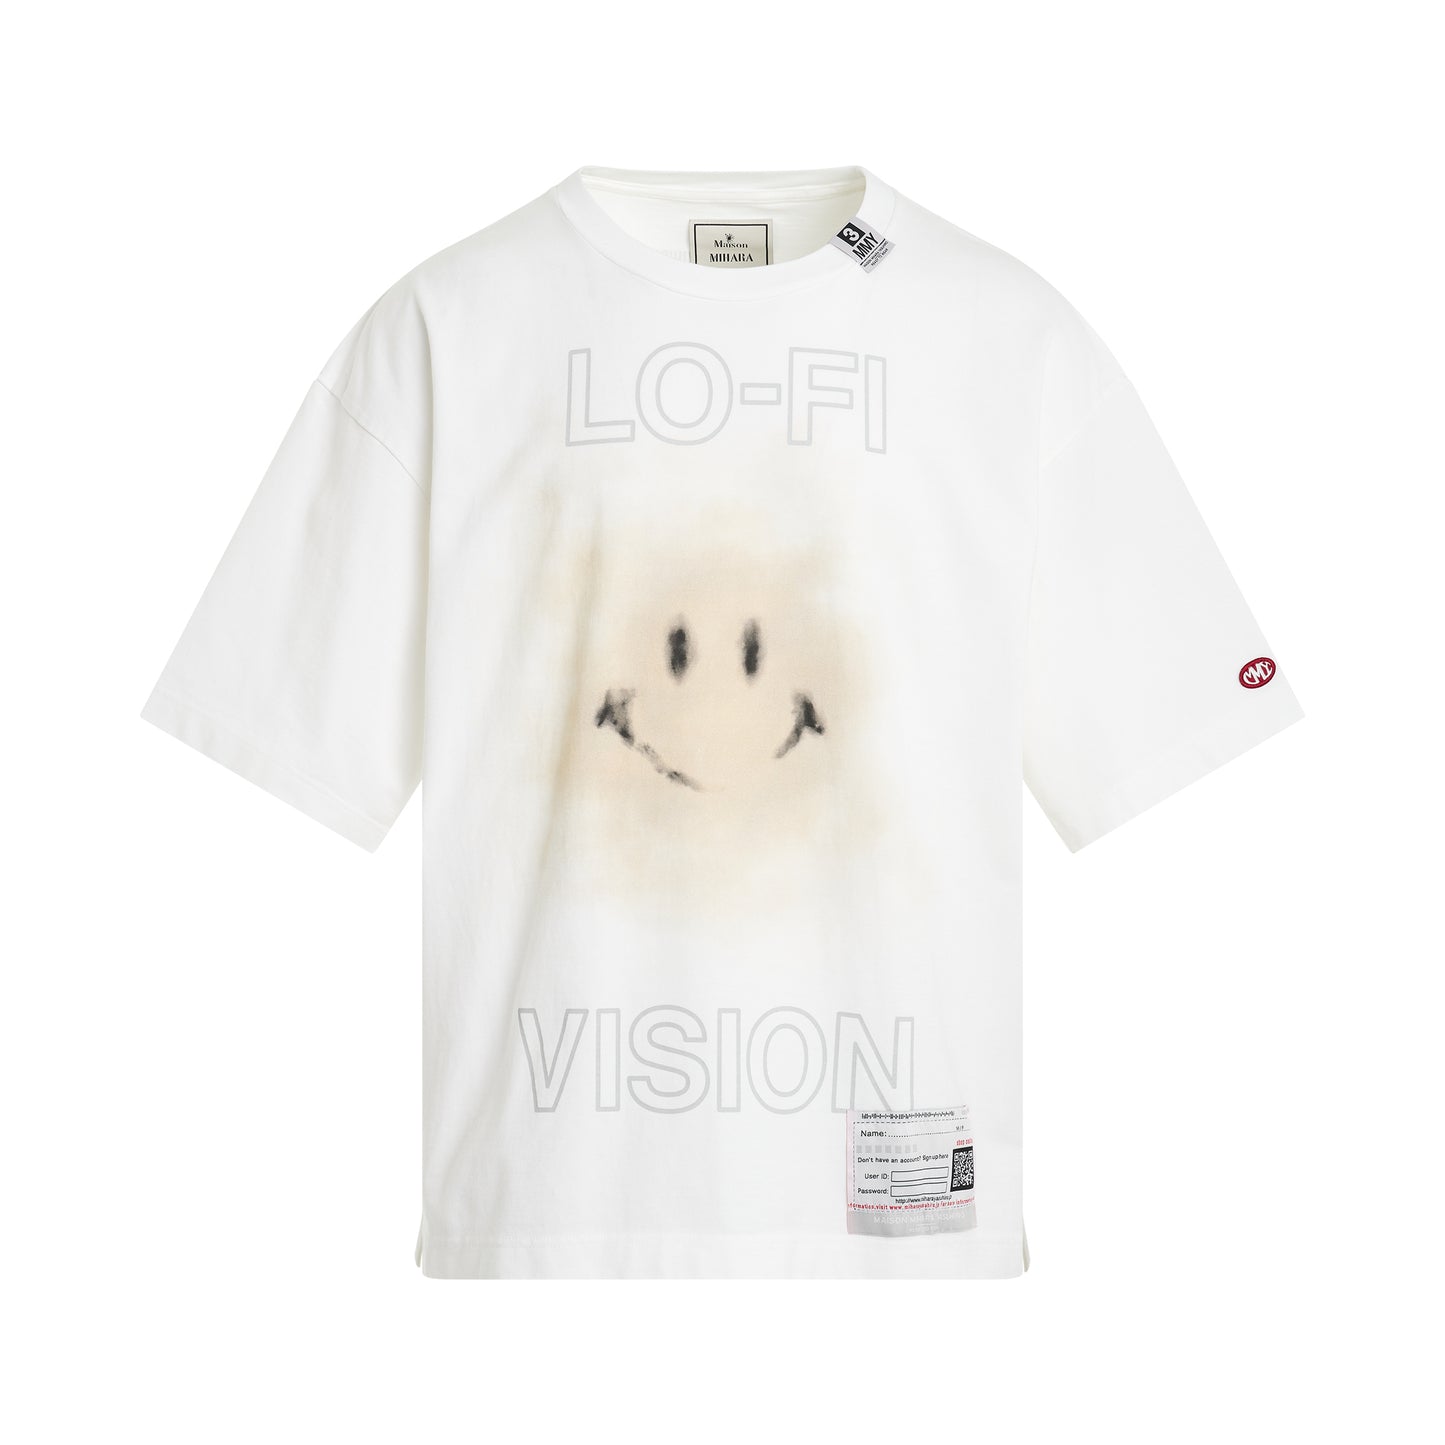 Smiley Face Printed T-Shirt in White